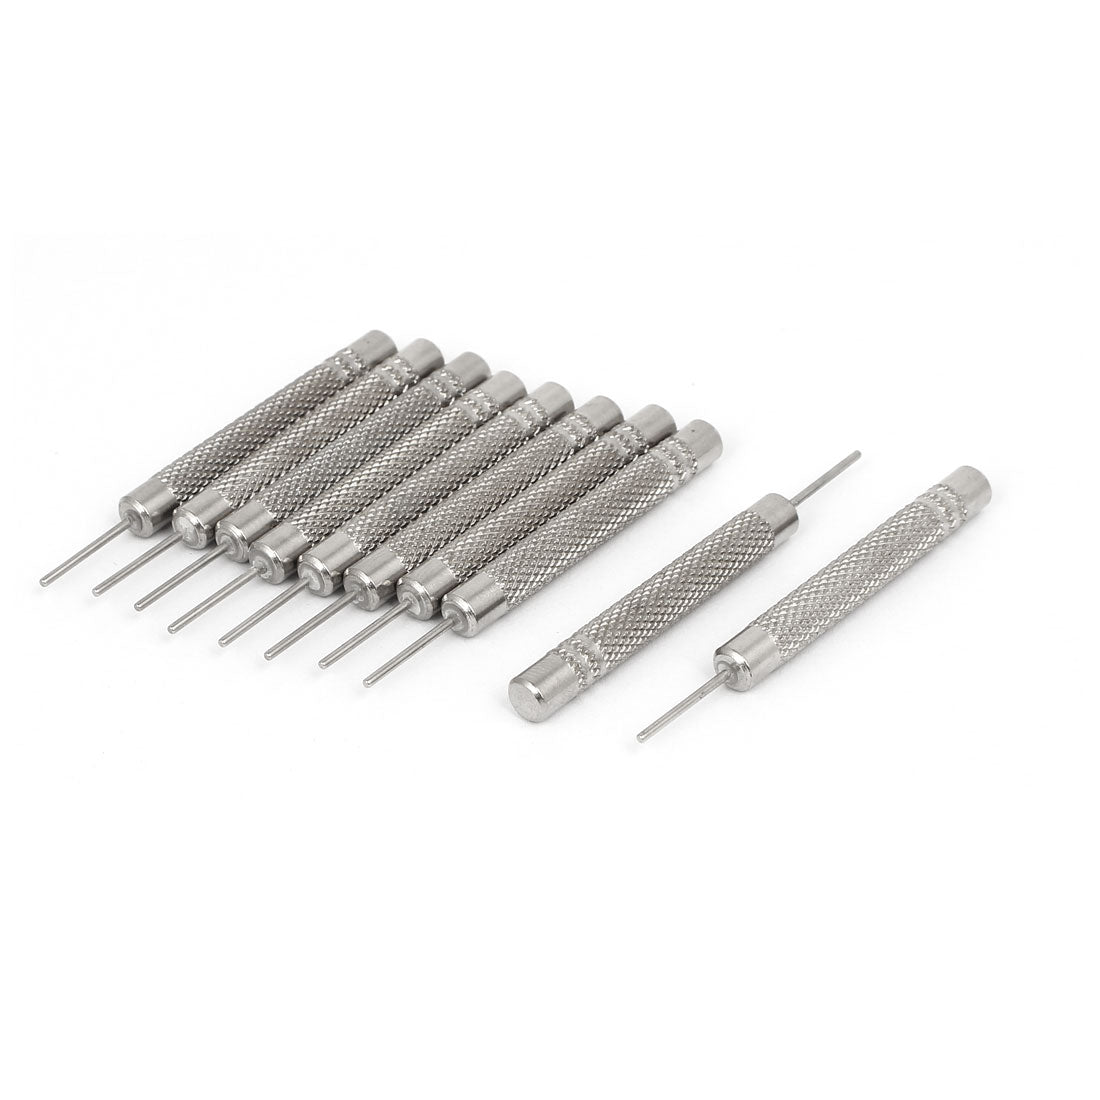 uxcell Uxcell 1mm Dia Tip Watch Band Strap Link Pin Remover Punch Repair Tool 10pcs